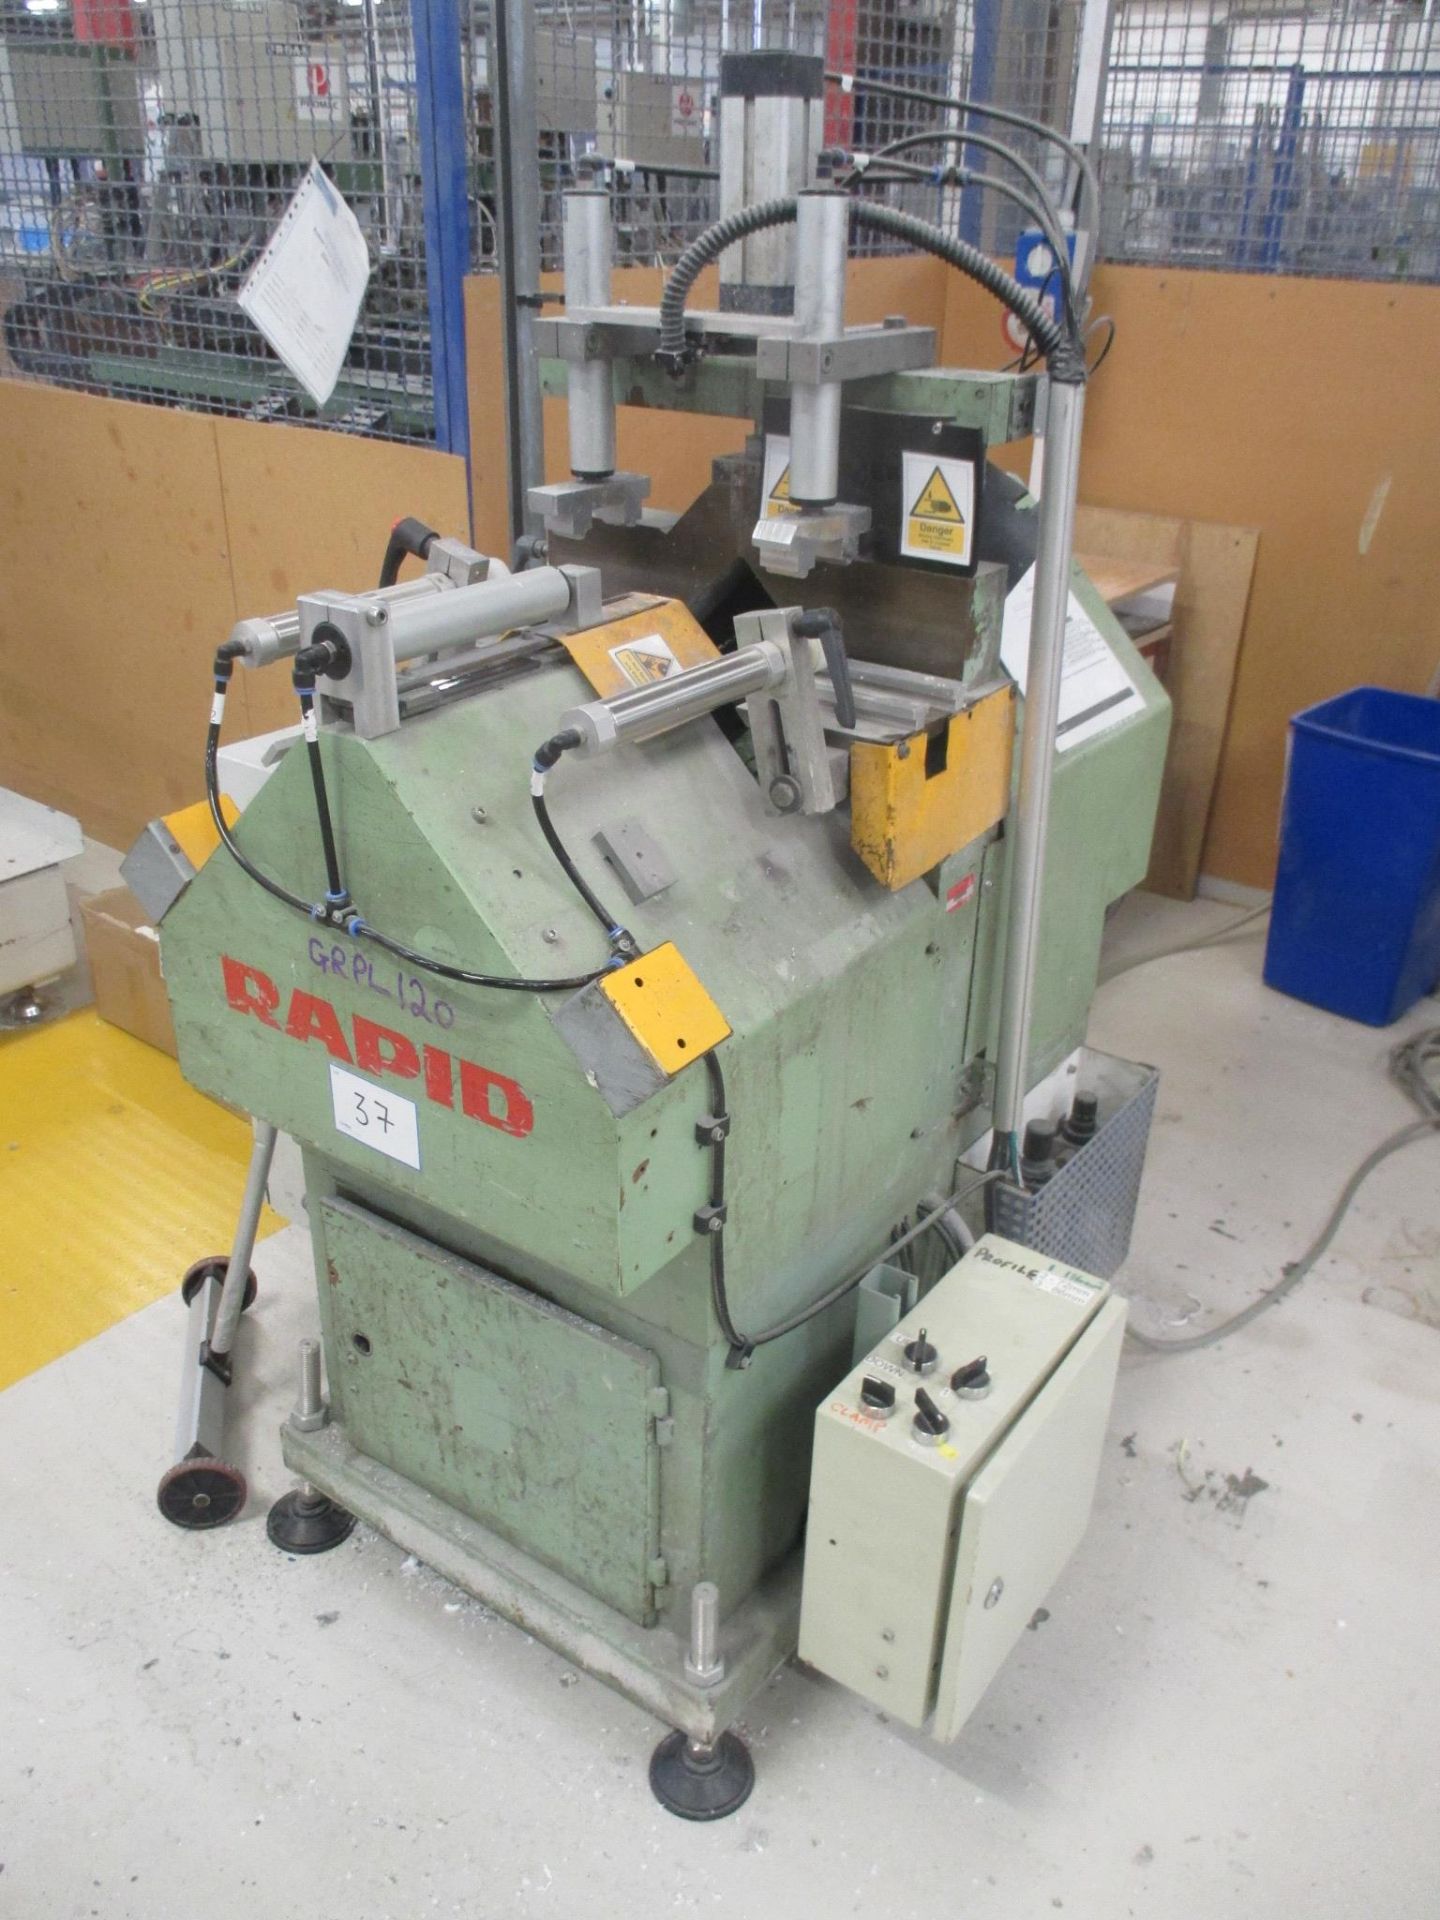 1: Rapid KS75 V-Notch Saw Serial Number: 37778/1767 Year of Manufacture: 2001